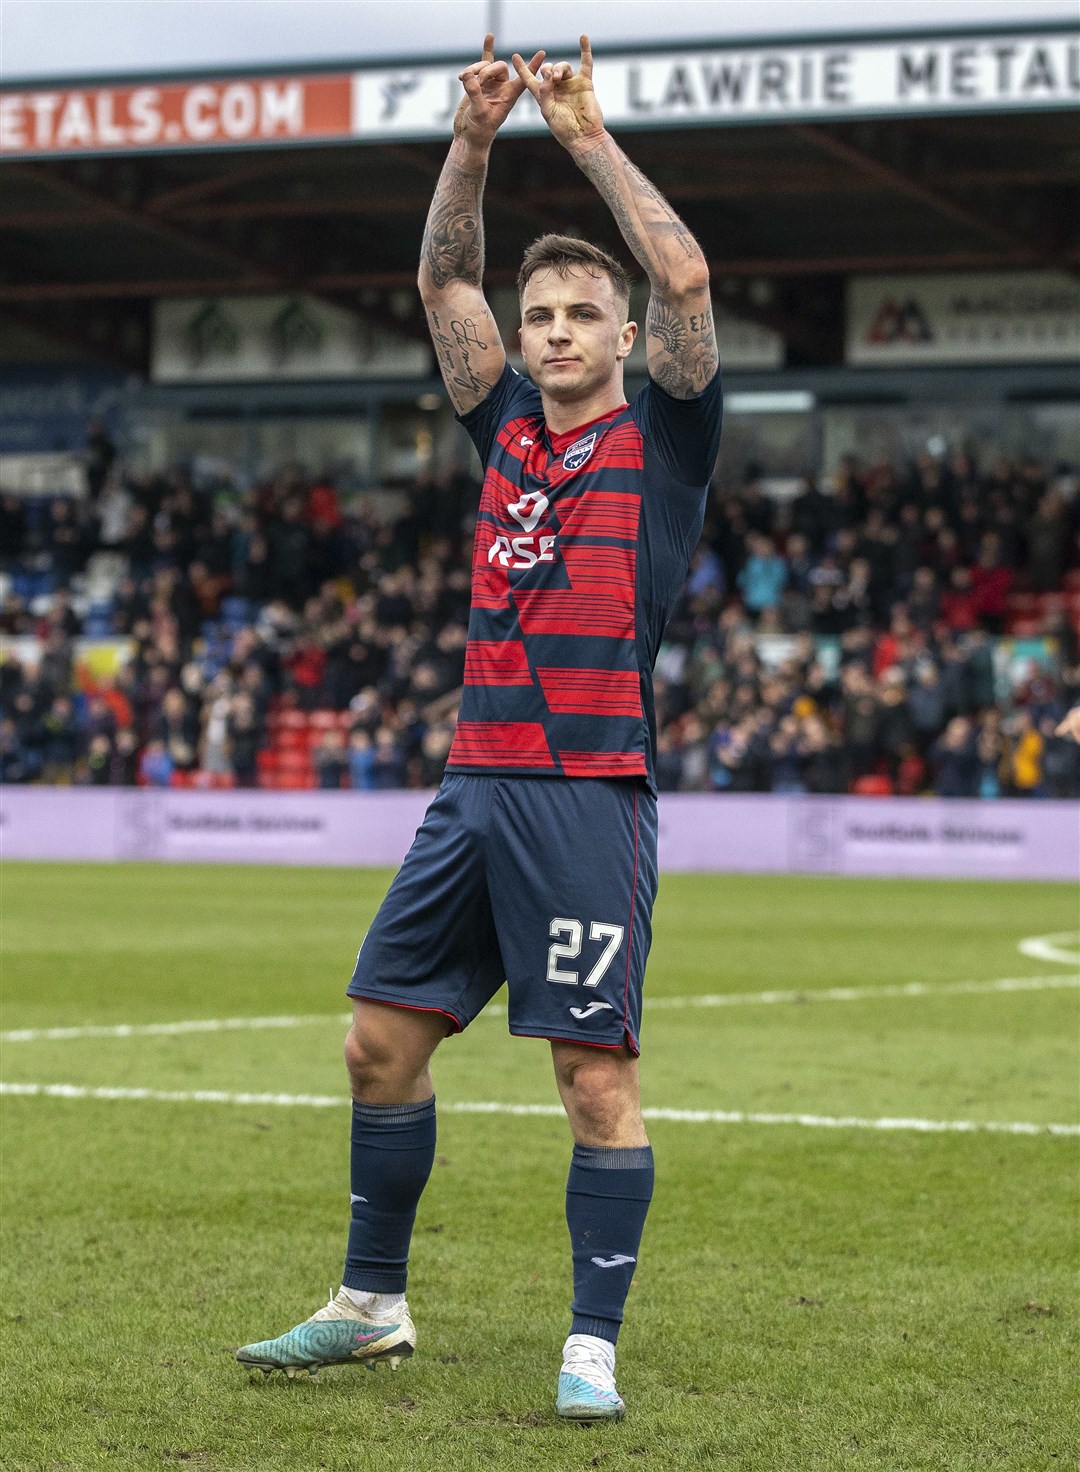 Picture - Ken Macpherson. Ross County(4) v Dundee Utd(0). 25/02/23. Ross County's Eamonn Brophy celebrates his 2nd goal.